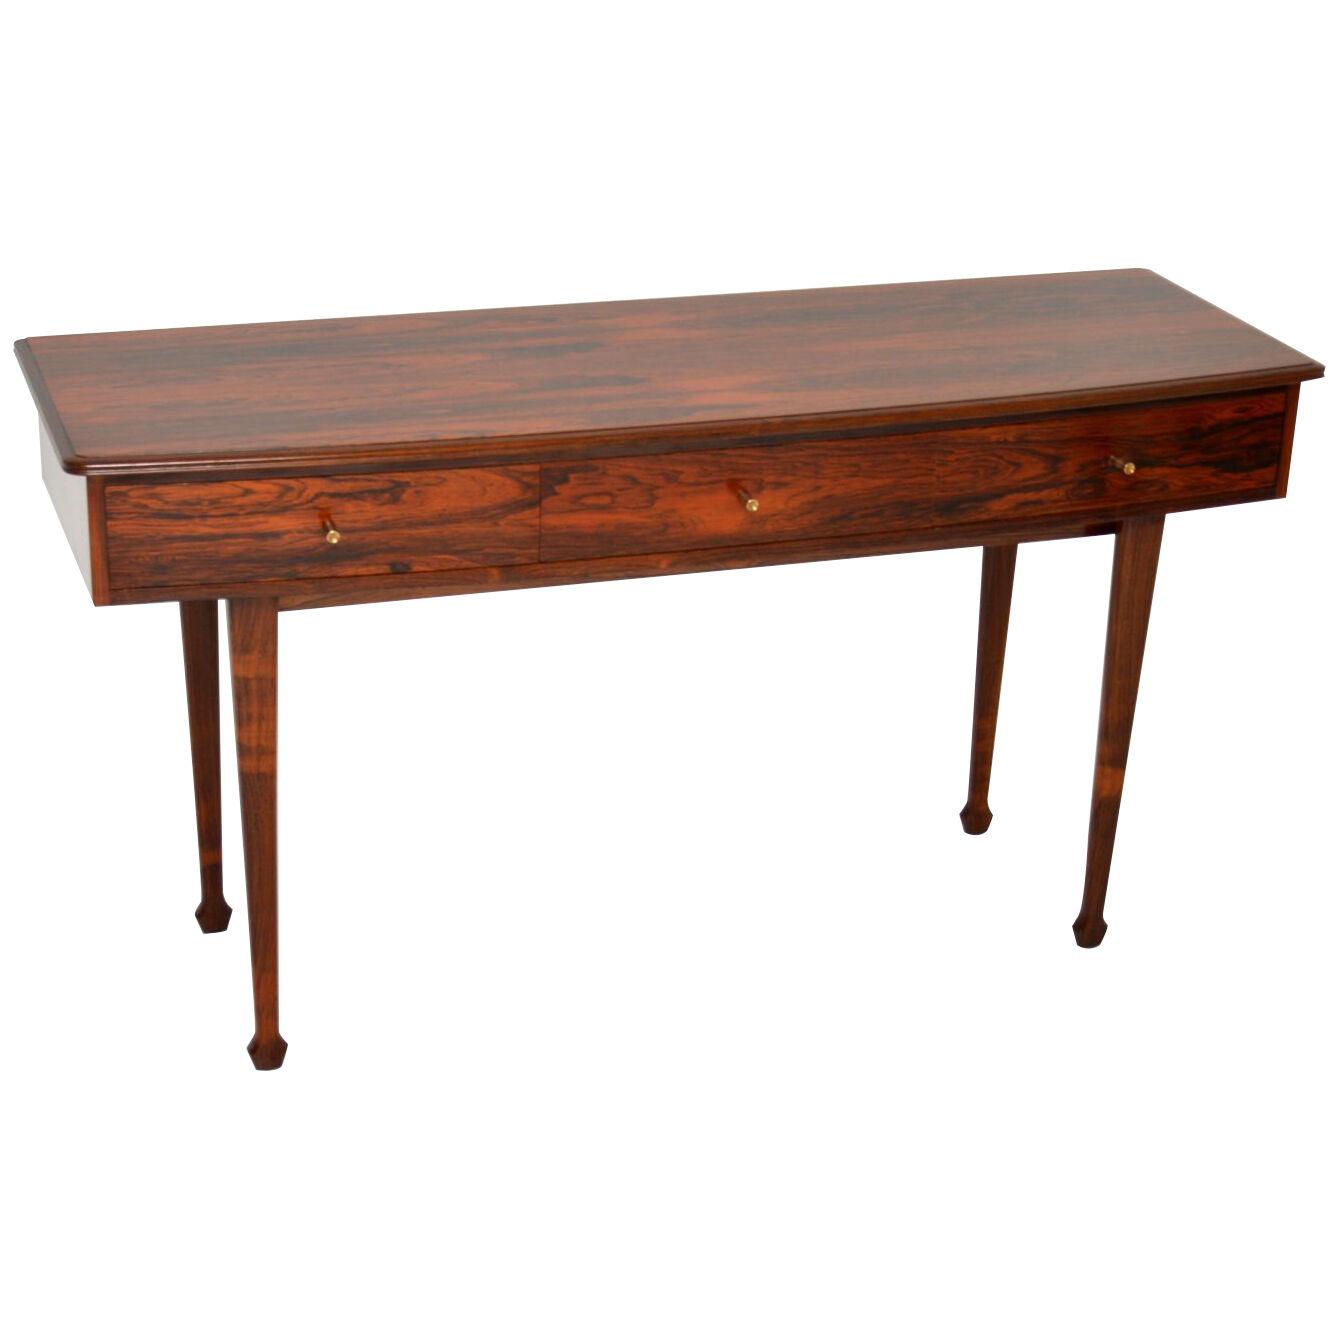 1950's Rosewood Server Table by A.J Milne for Heal's